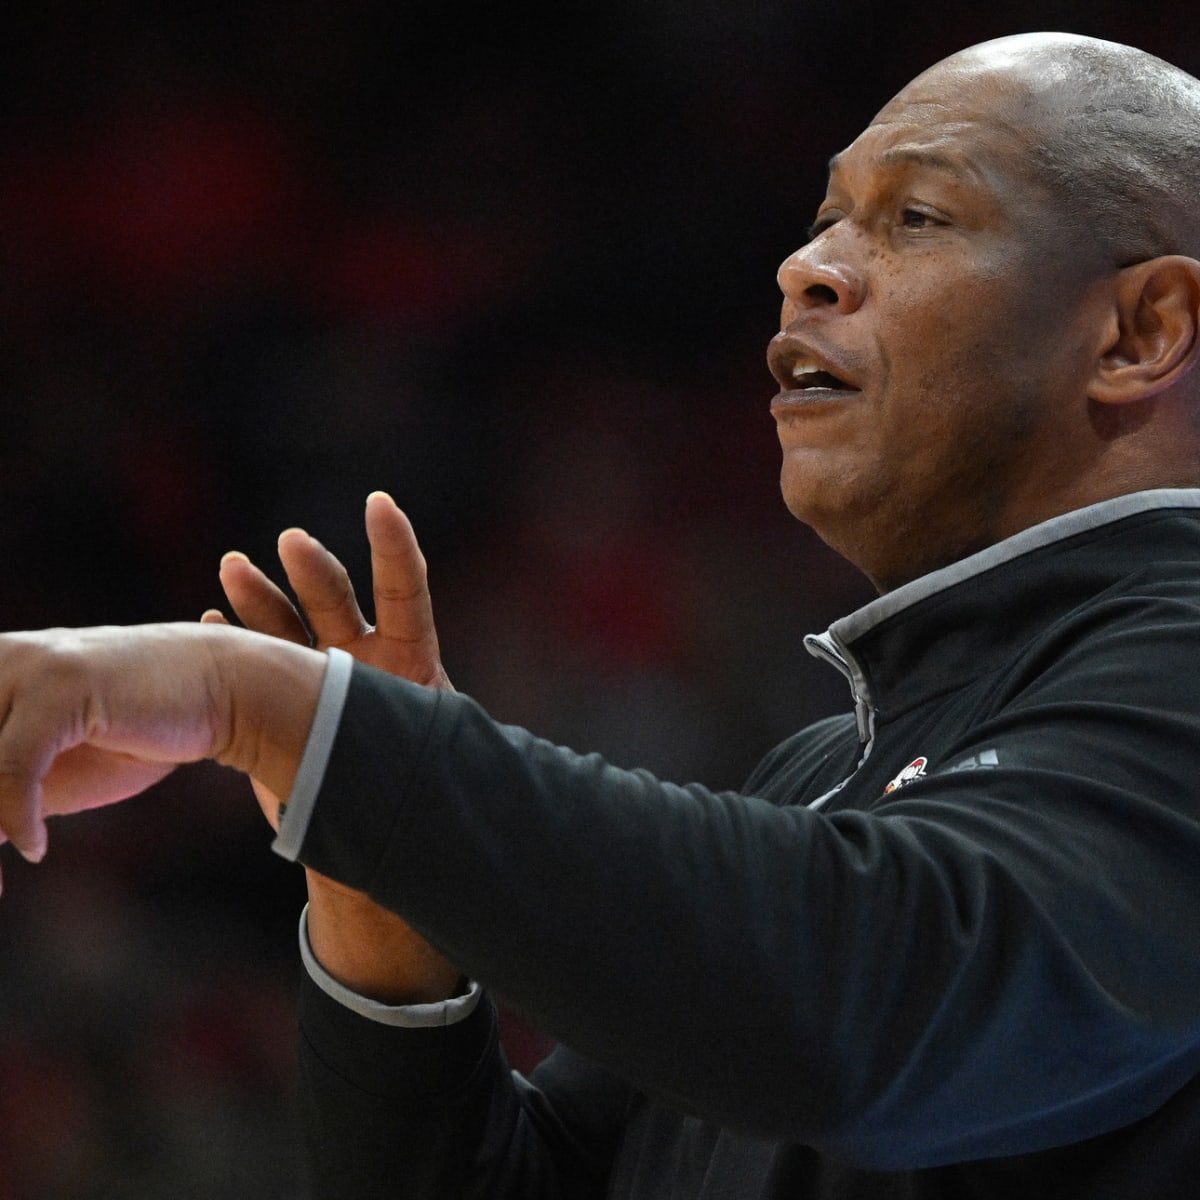 Kenny Payne ready for many challenges as Louisville coach